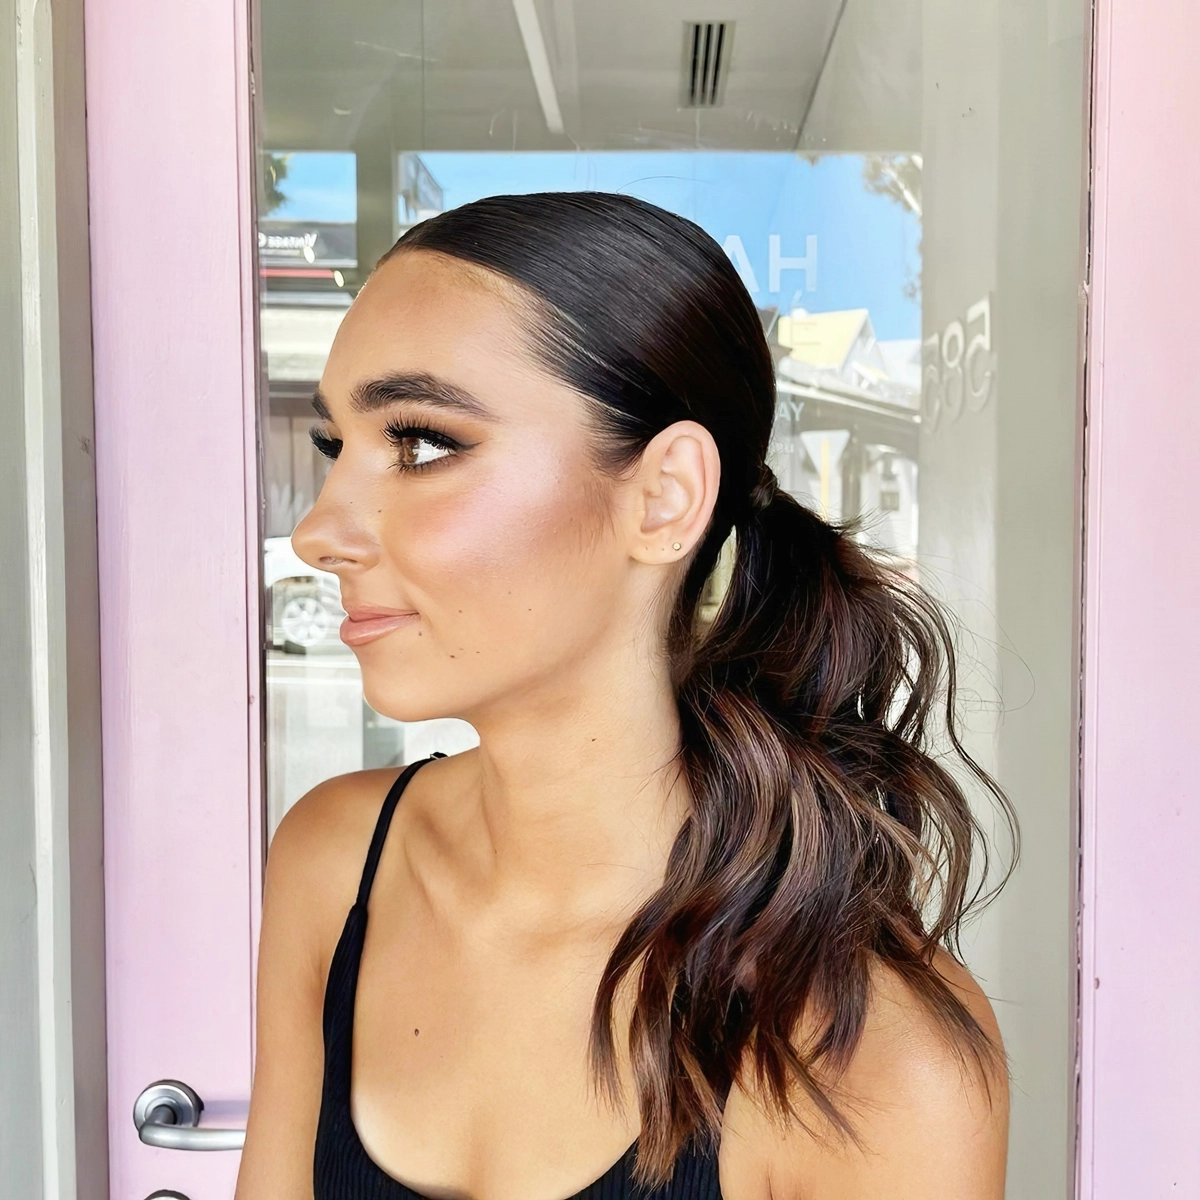 sleek frisur tiefer pony styling tipps hairbygabrielle crilly